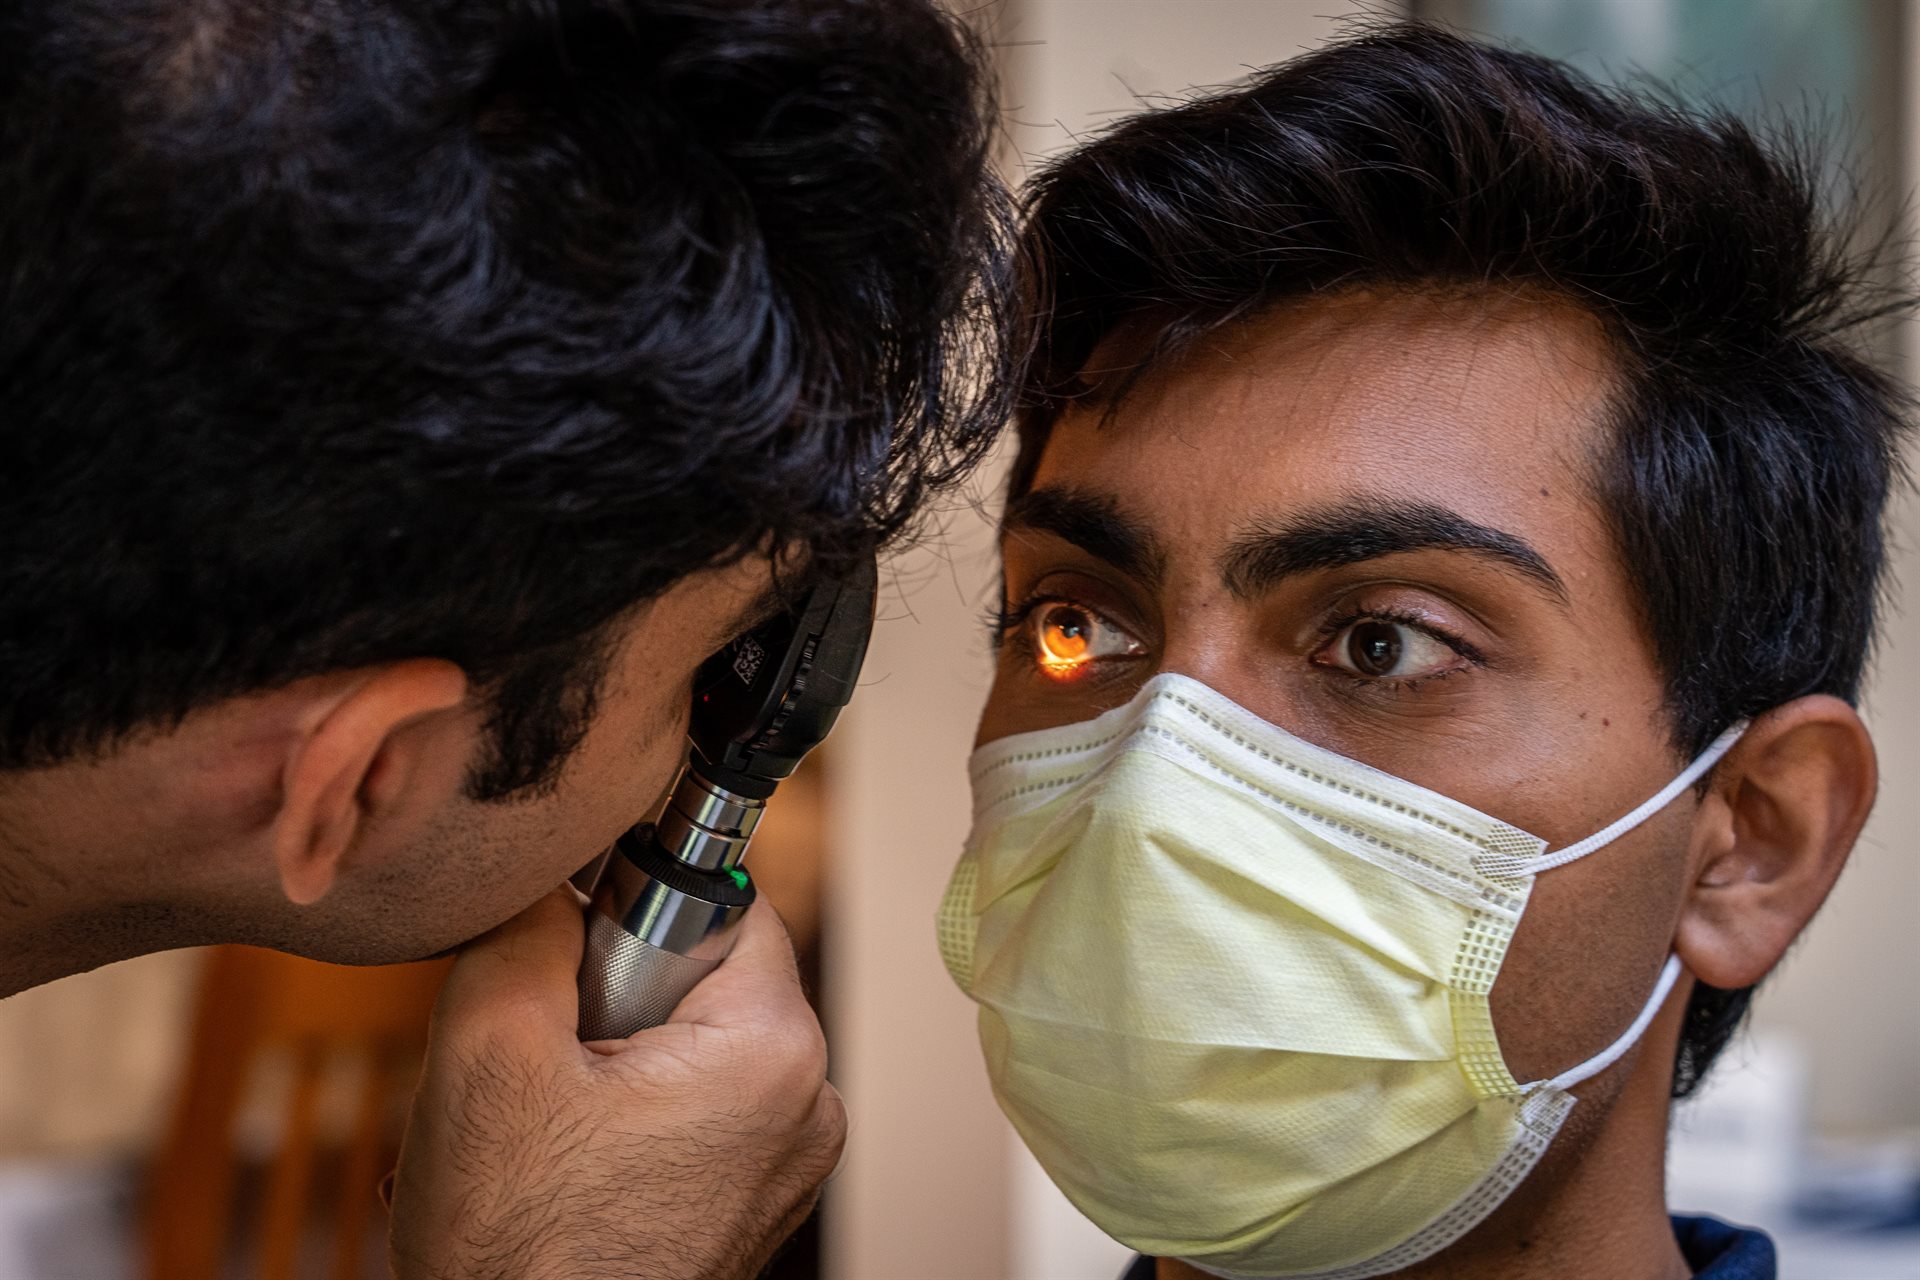 A man is holding an ophthalmoscope and looking into the eye of a another man, who is wearing a surgical mask.